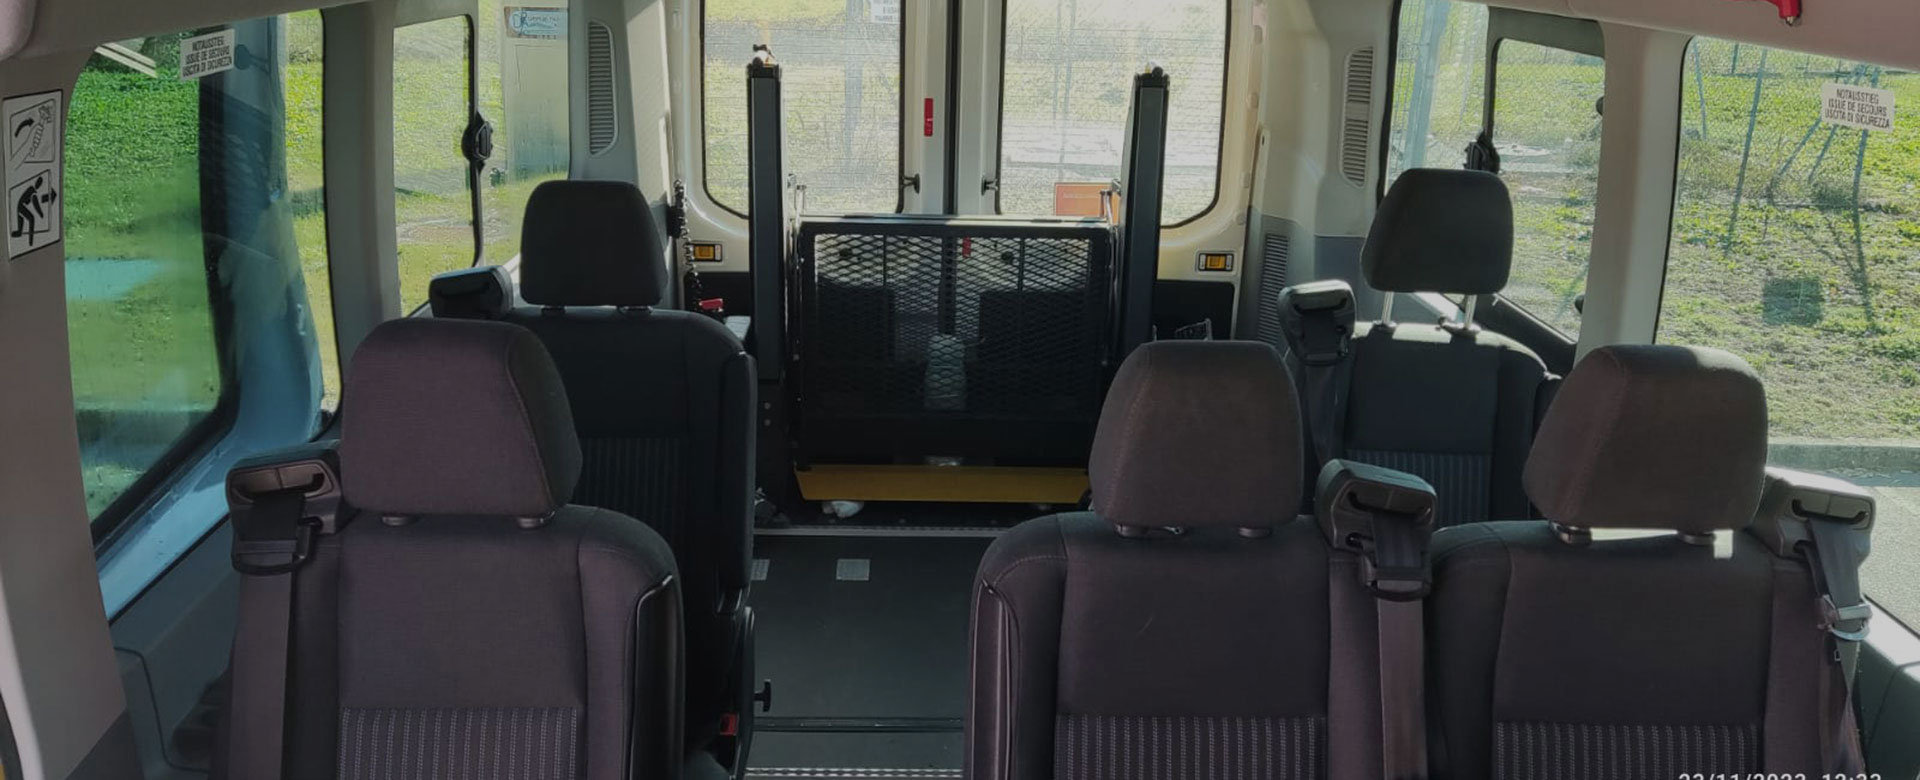 Transport for disabled people with vehicles equipped with hydraulic platforms